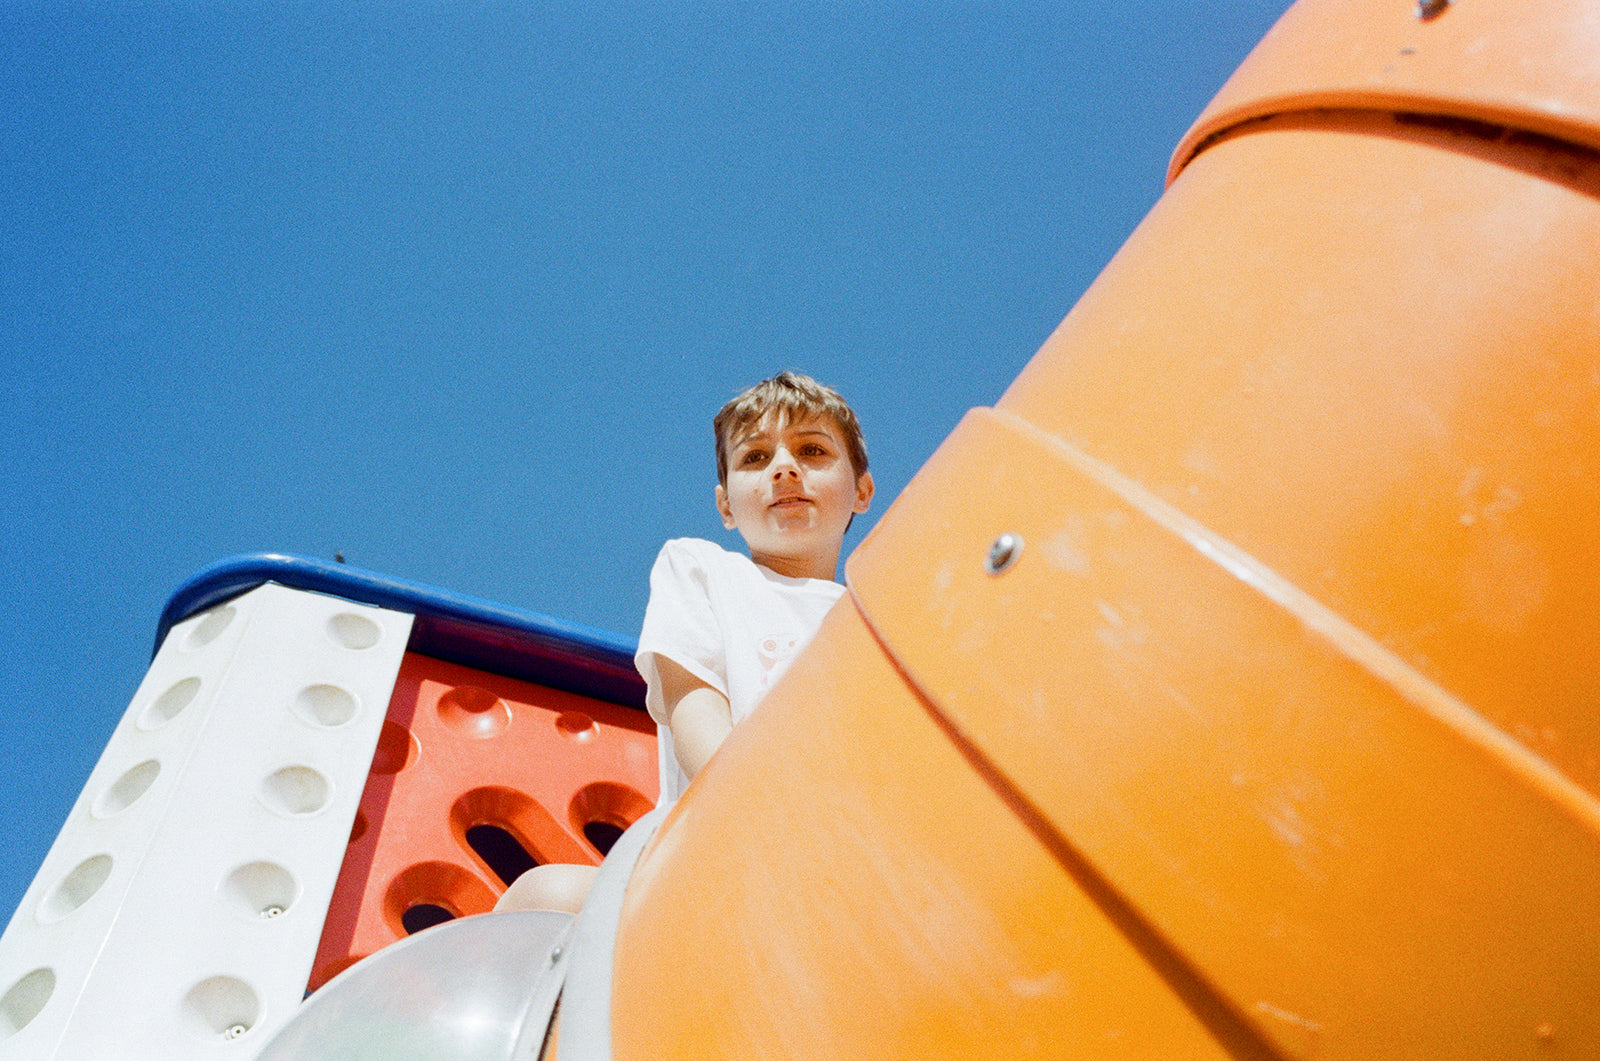 Little boy sits atop an orange tunnel slide at a sunny playground.